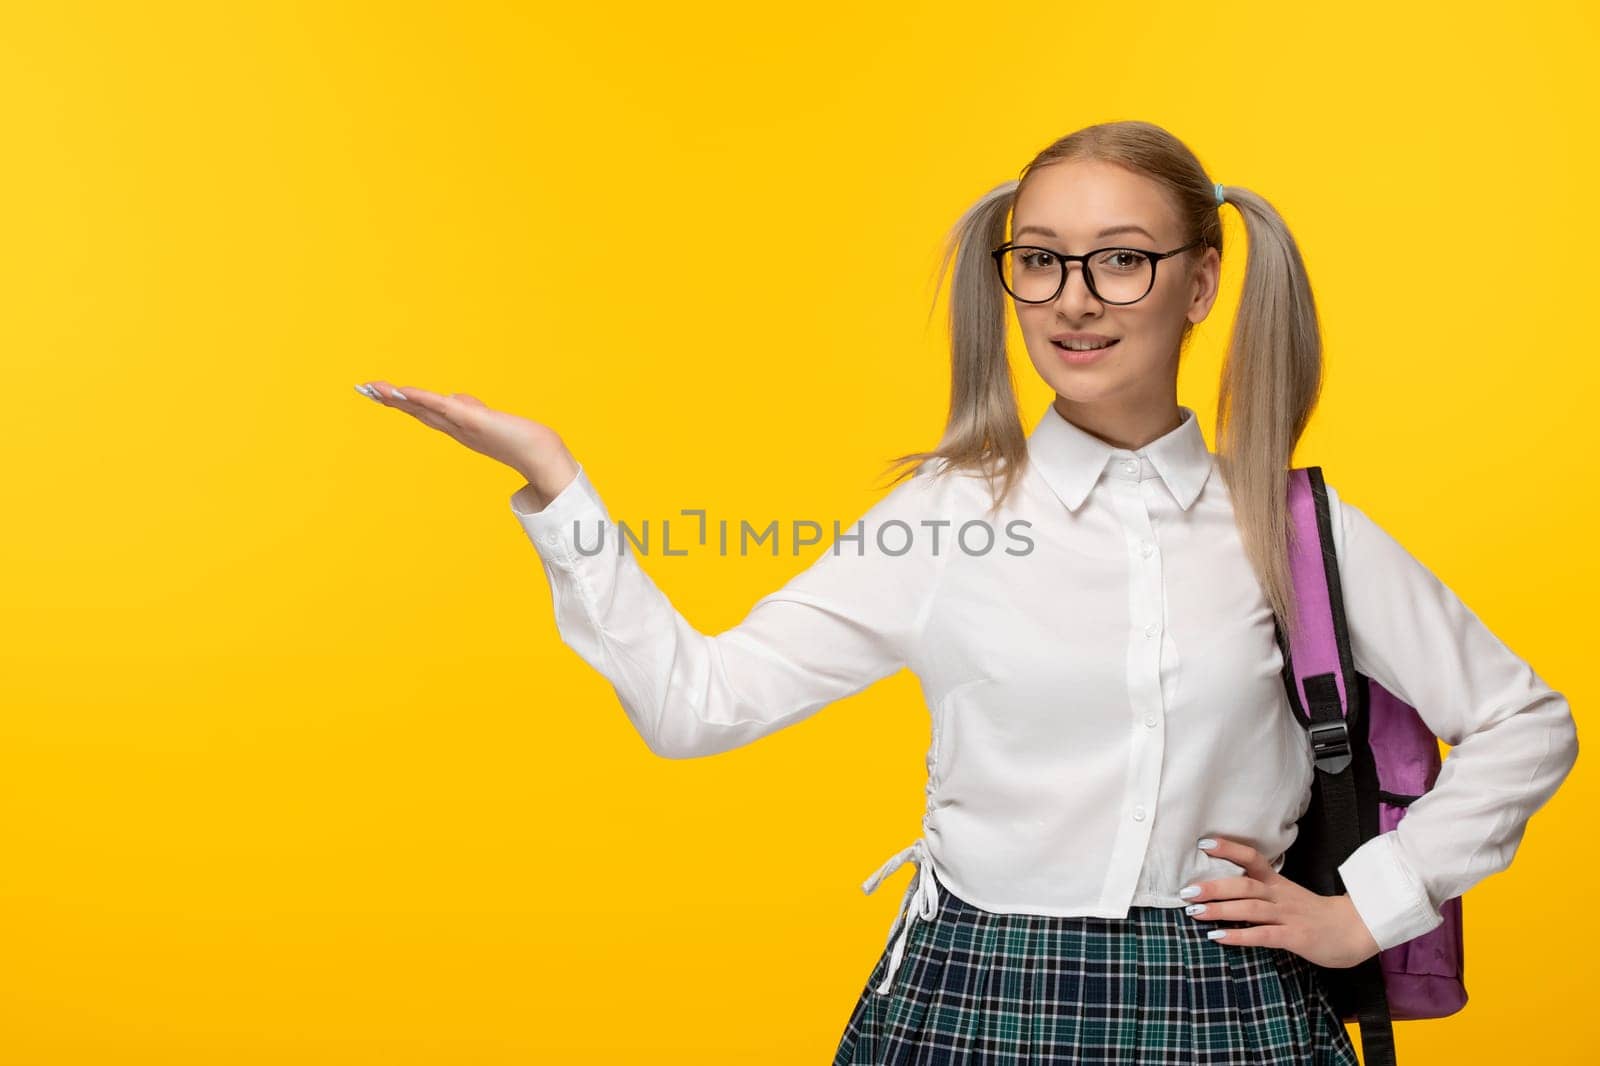 world book day smiling cute school girl with waving hands and pony tails by Kamran